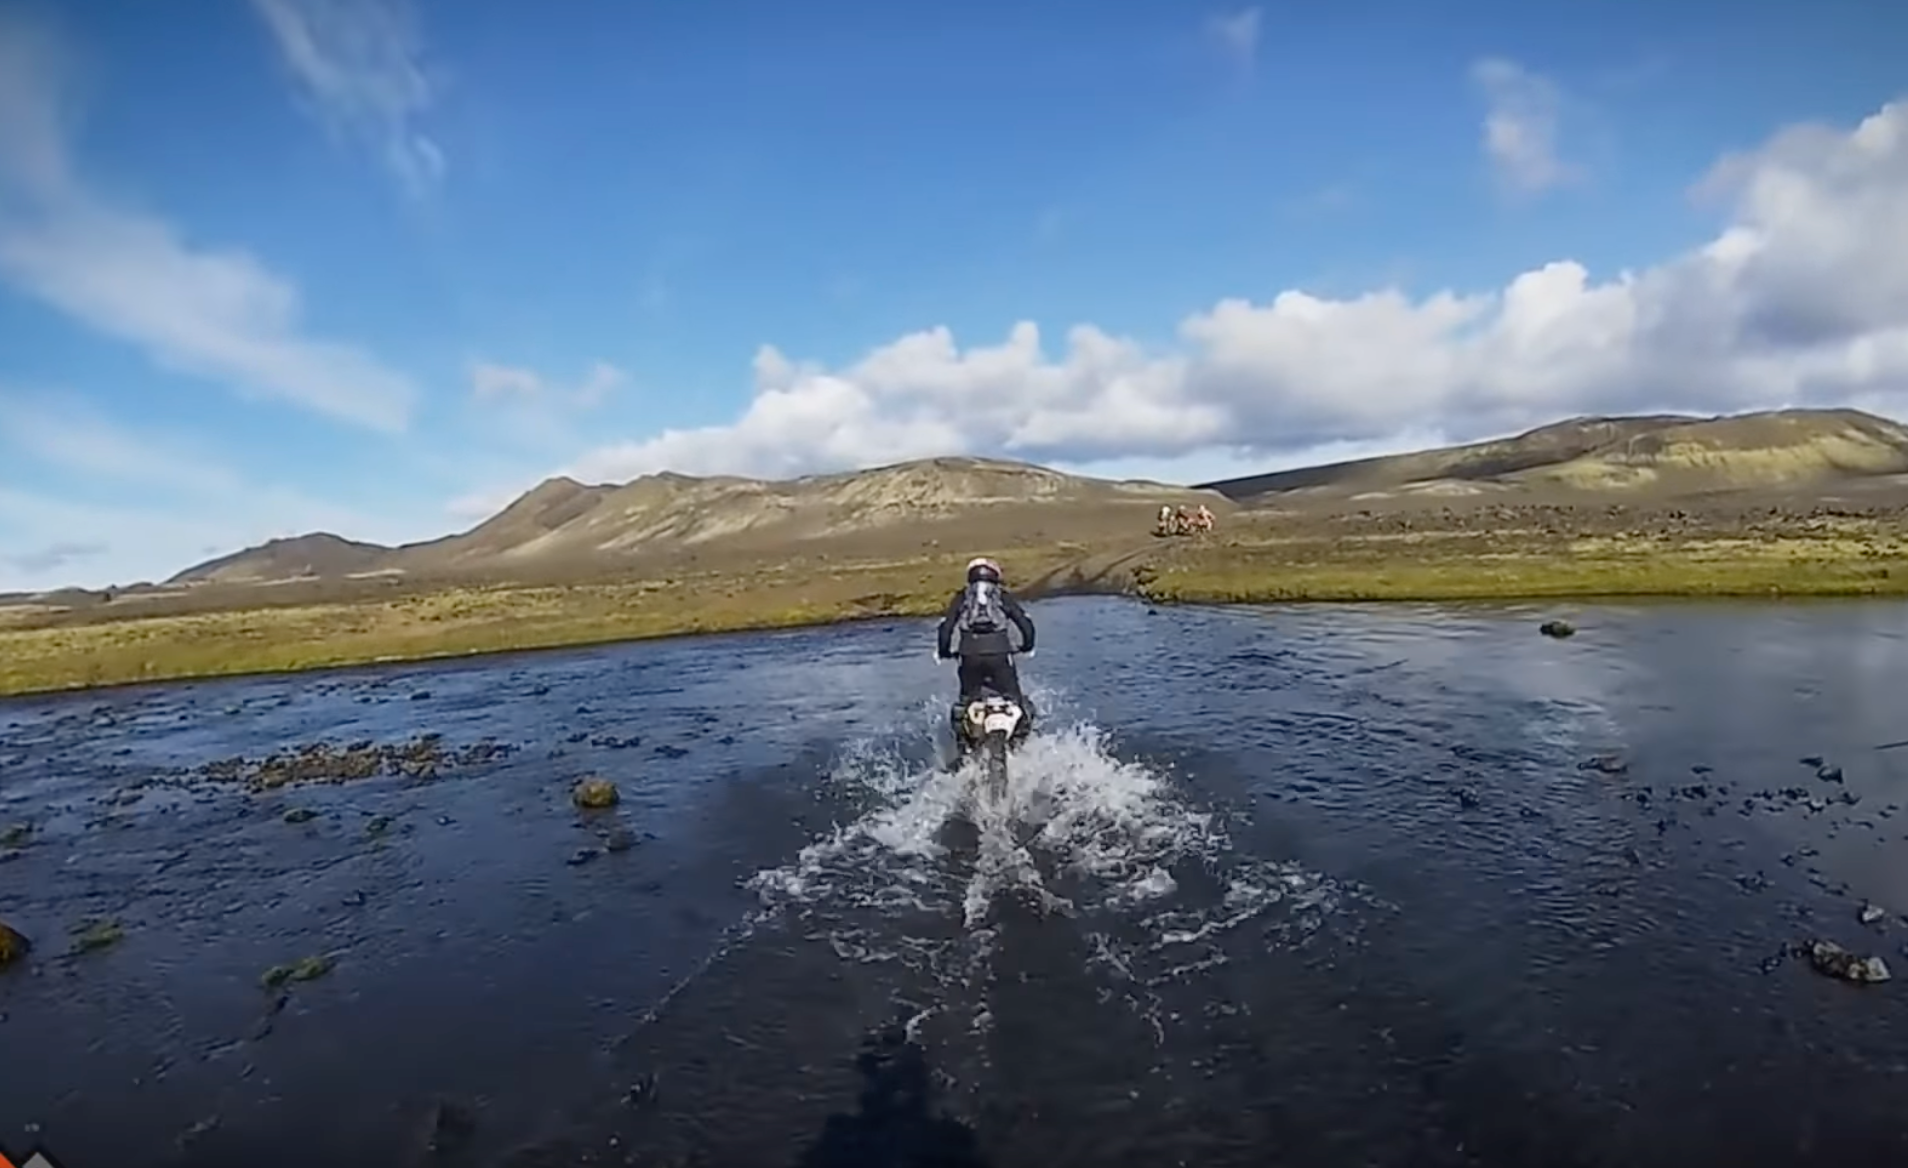 DIRTBIKES IN ICELAND, RIDE WITH LOCALS